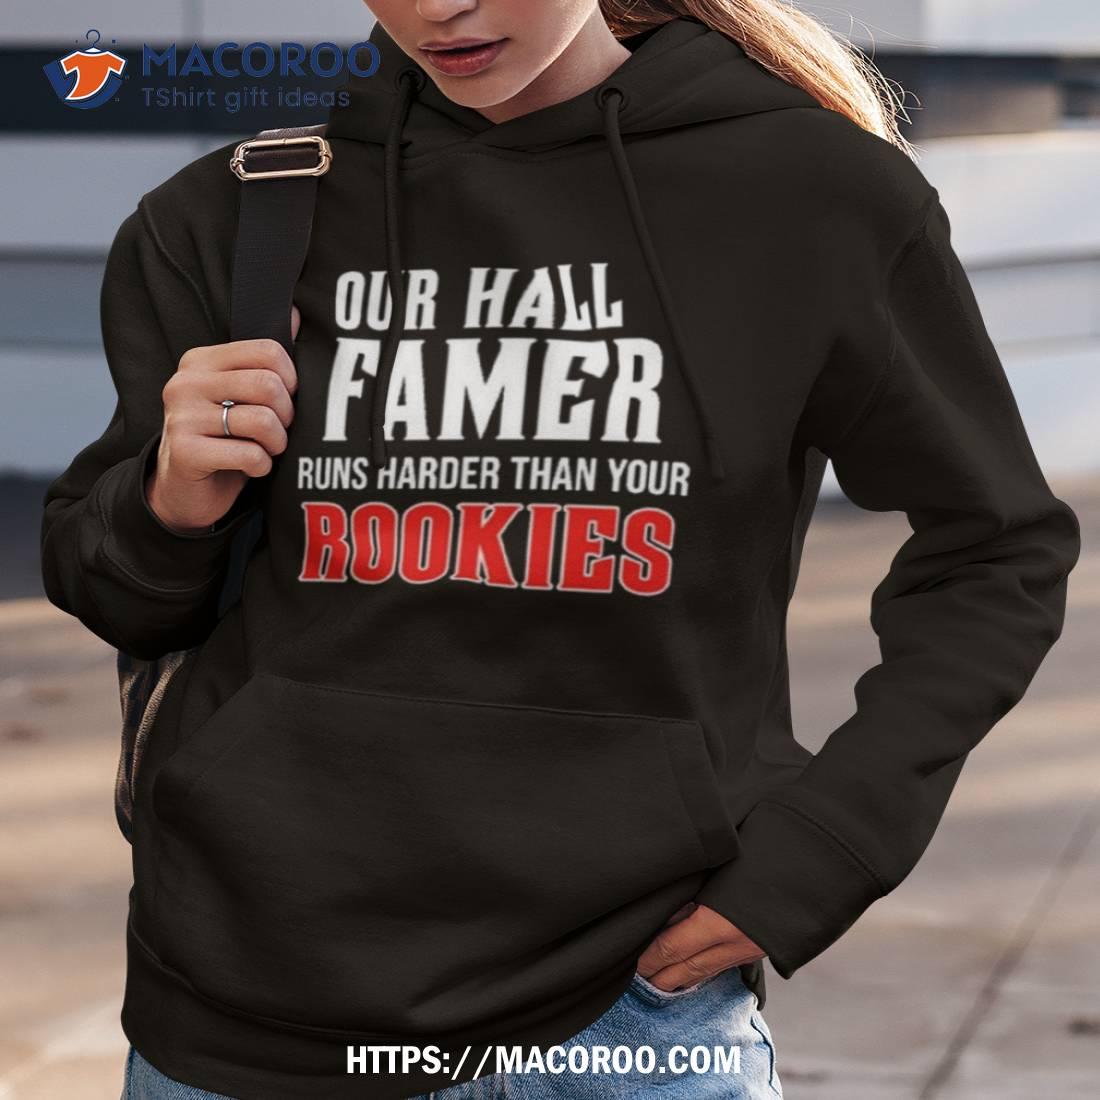 Our Hall Of Famer Runs Harder Than Your Rookies Shirt Hoodie 3